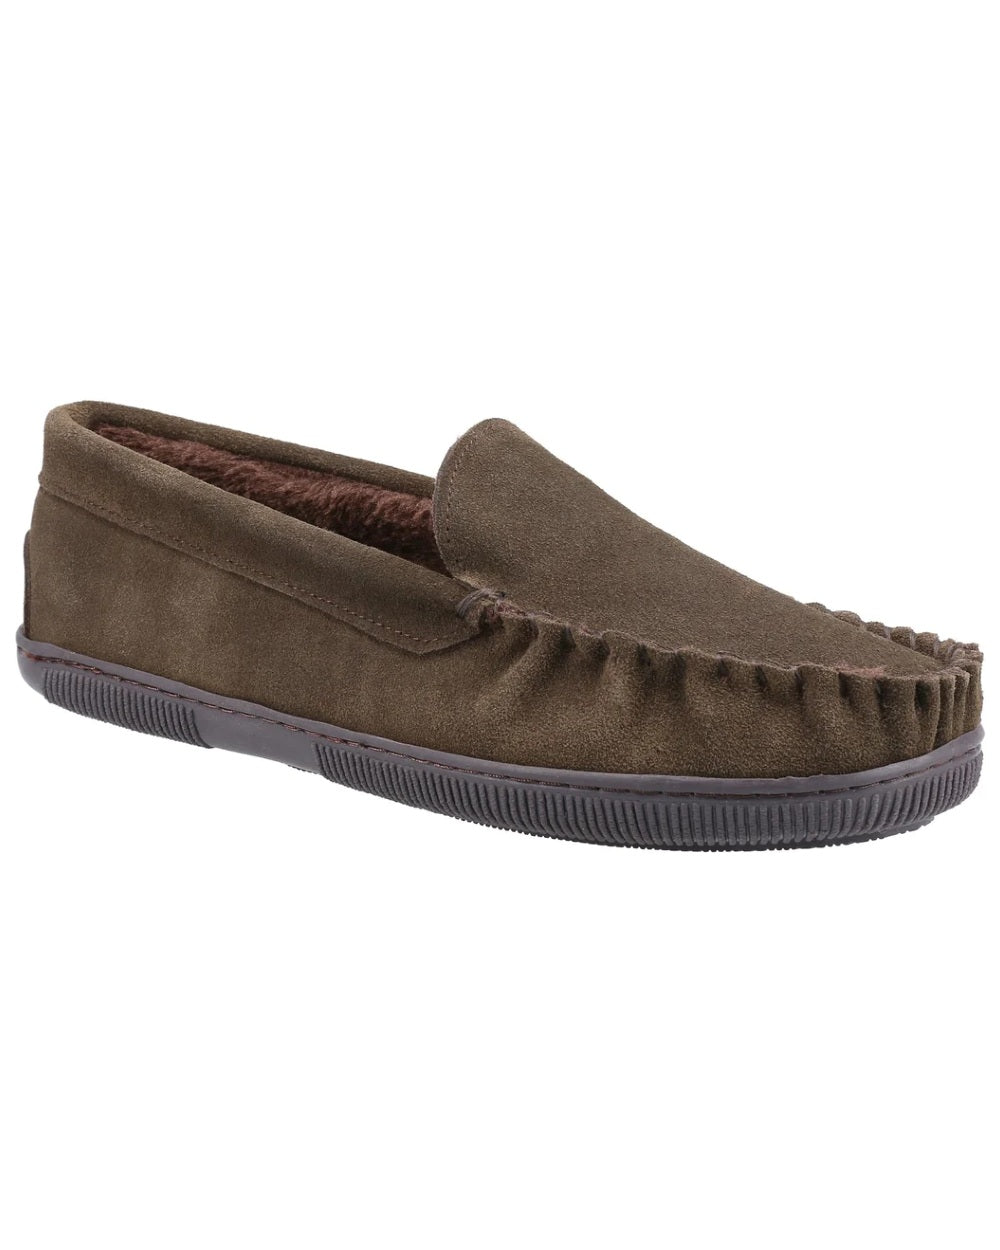 Cotswold Mens Sodbury Moccasin Slippers in Brown 